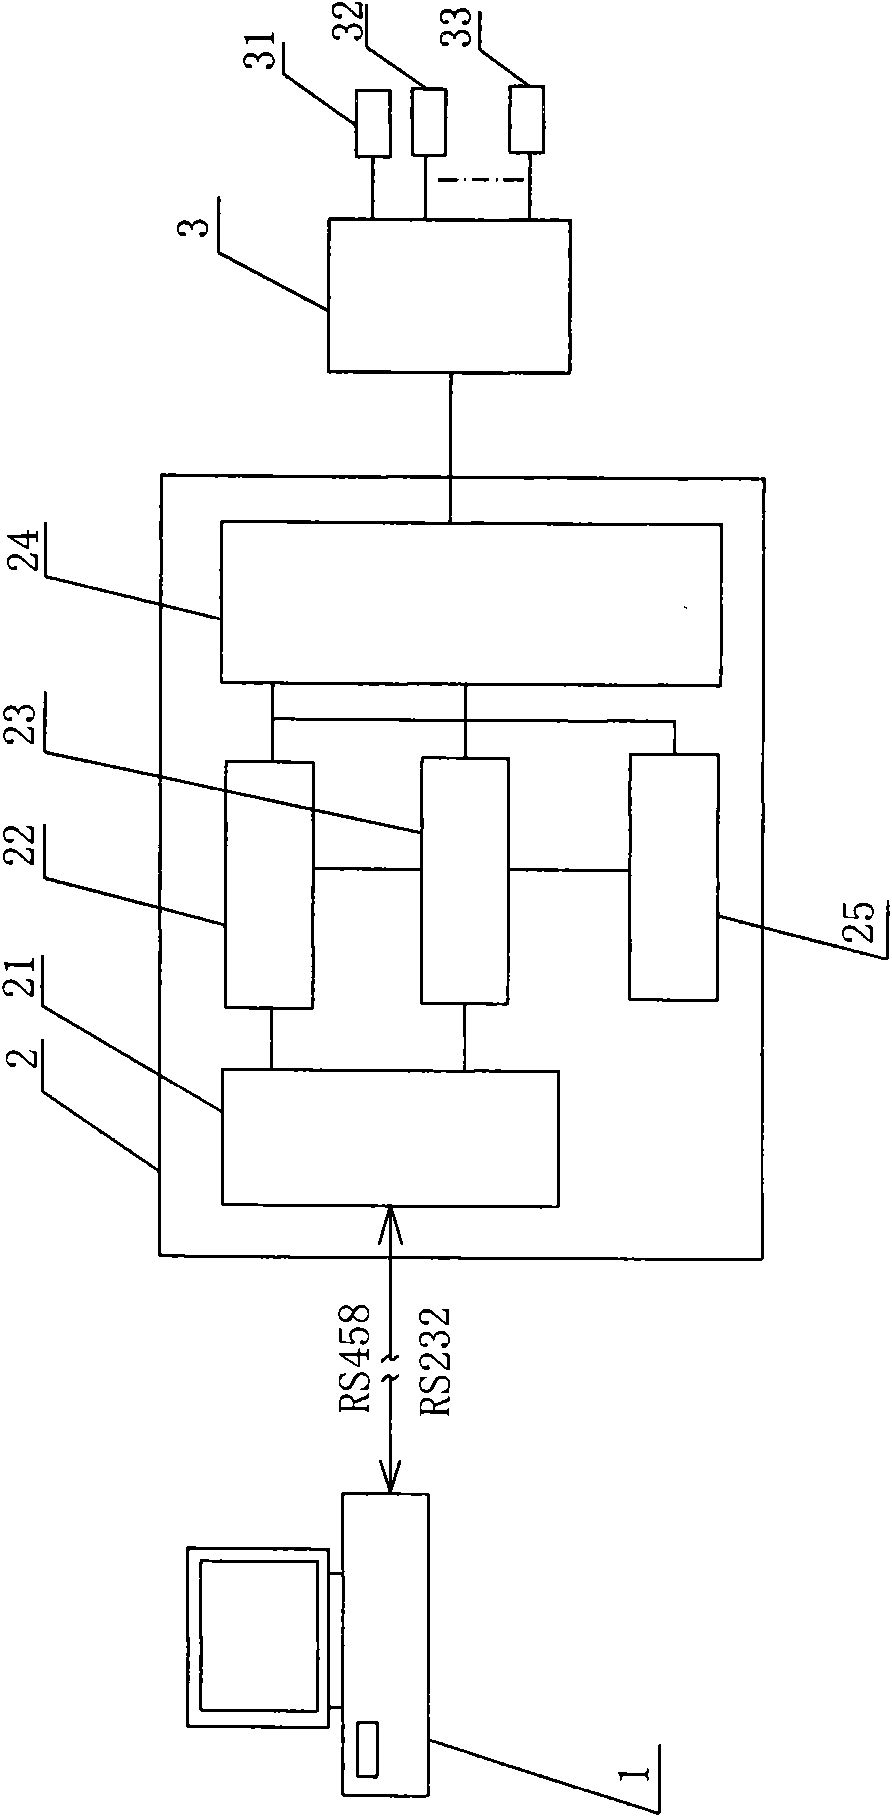 1-wire bus device id-based communication protocol